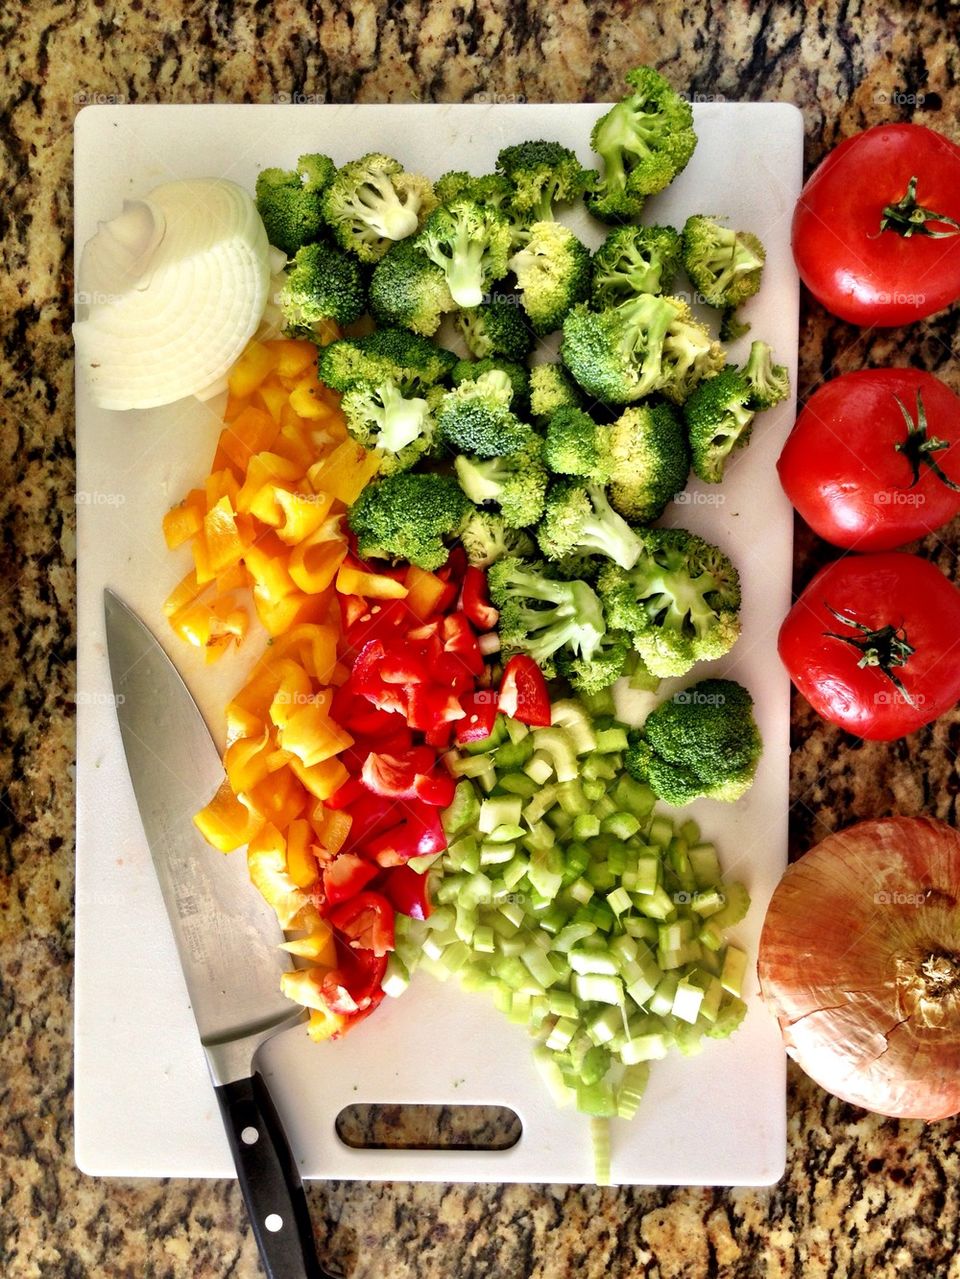 Vegetables on cutting board